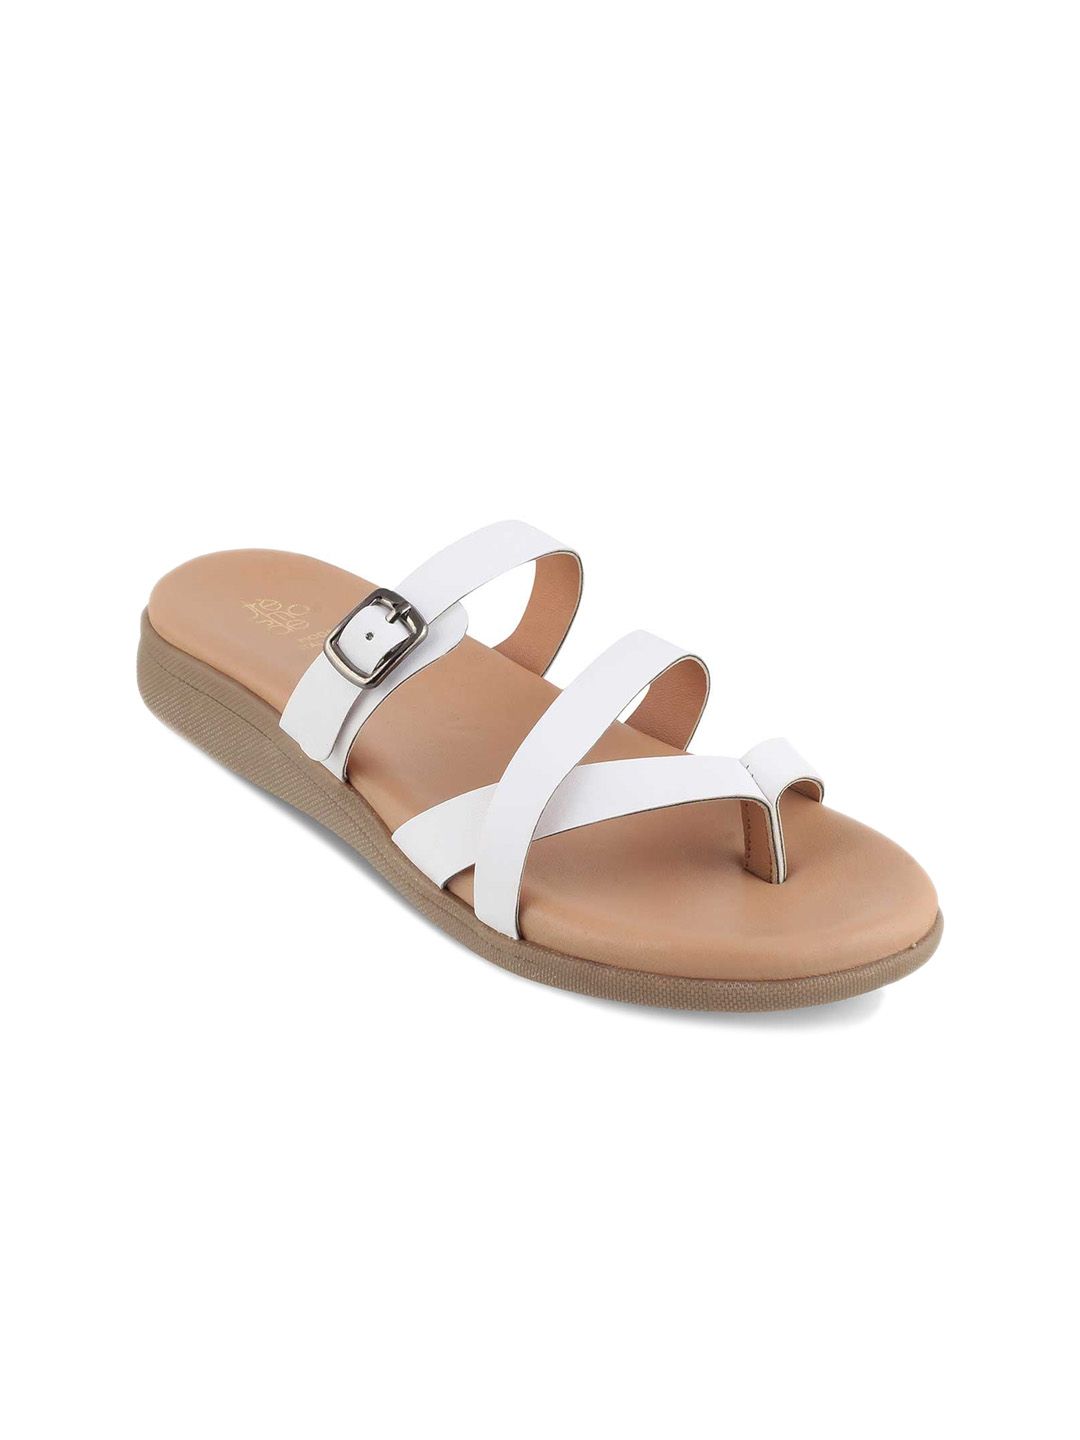 Tresmode Open Toe Flats With Buckles Price in India